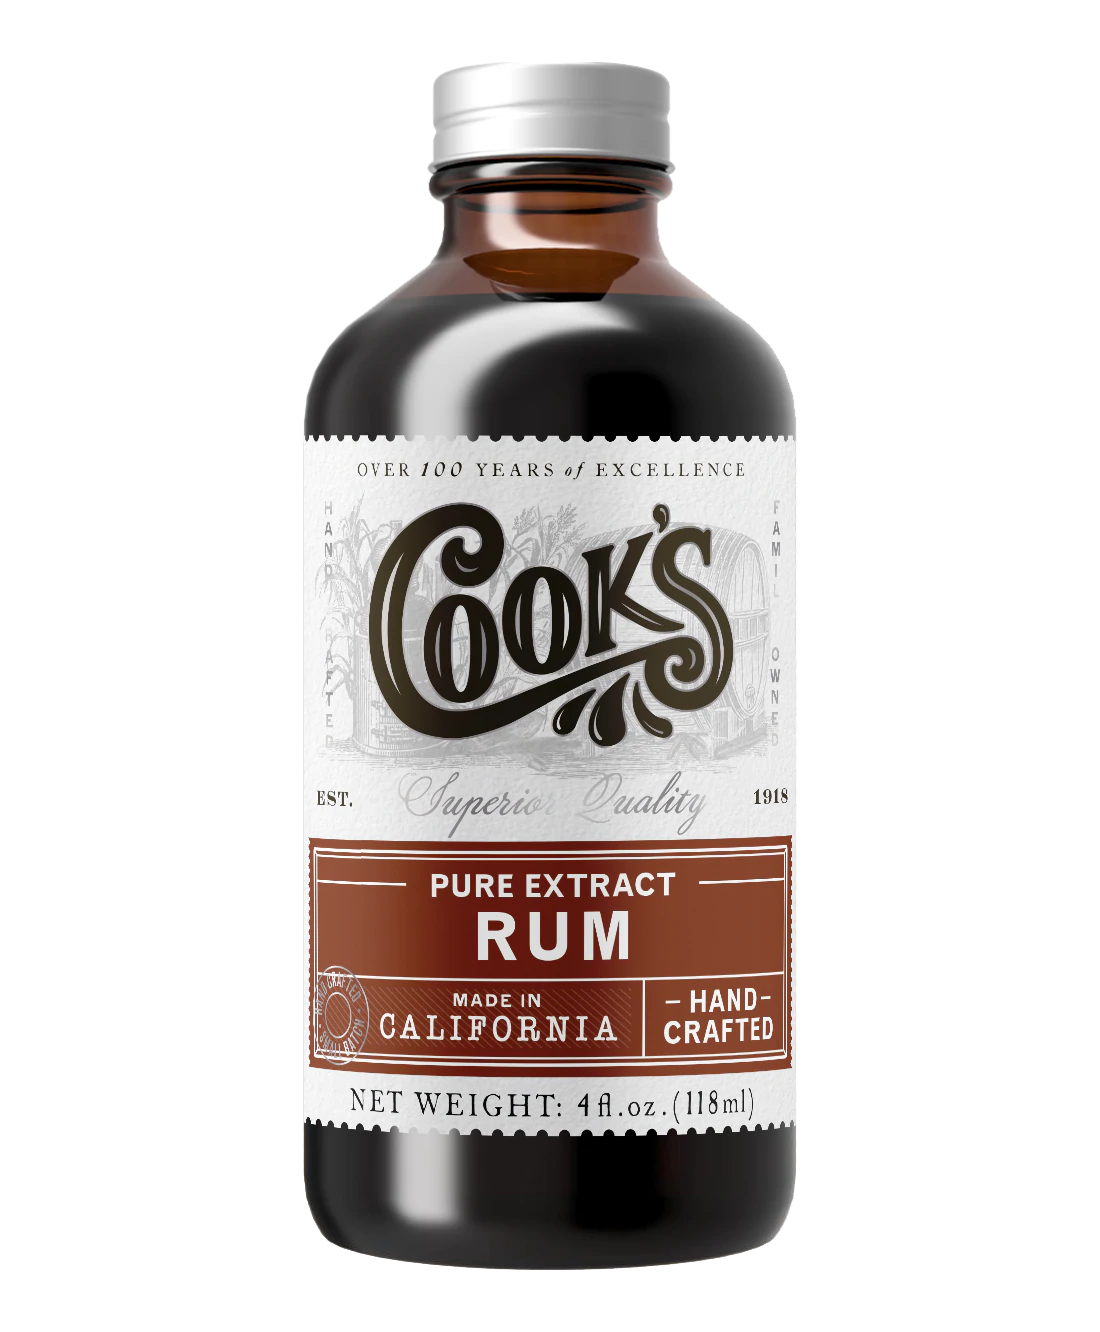 Cook's Rum Extract (Pure)